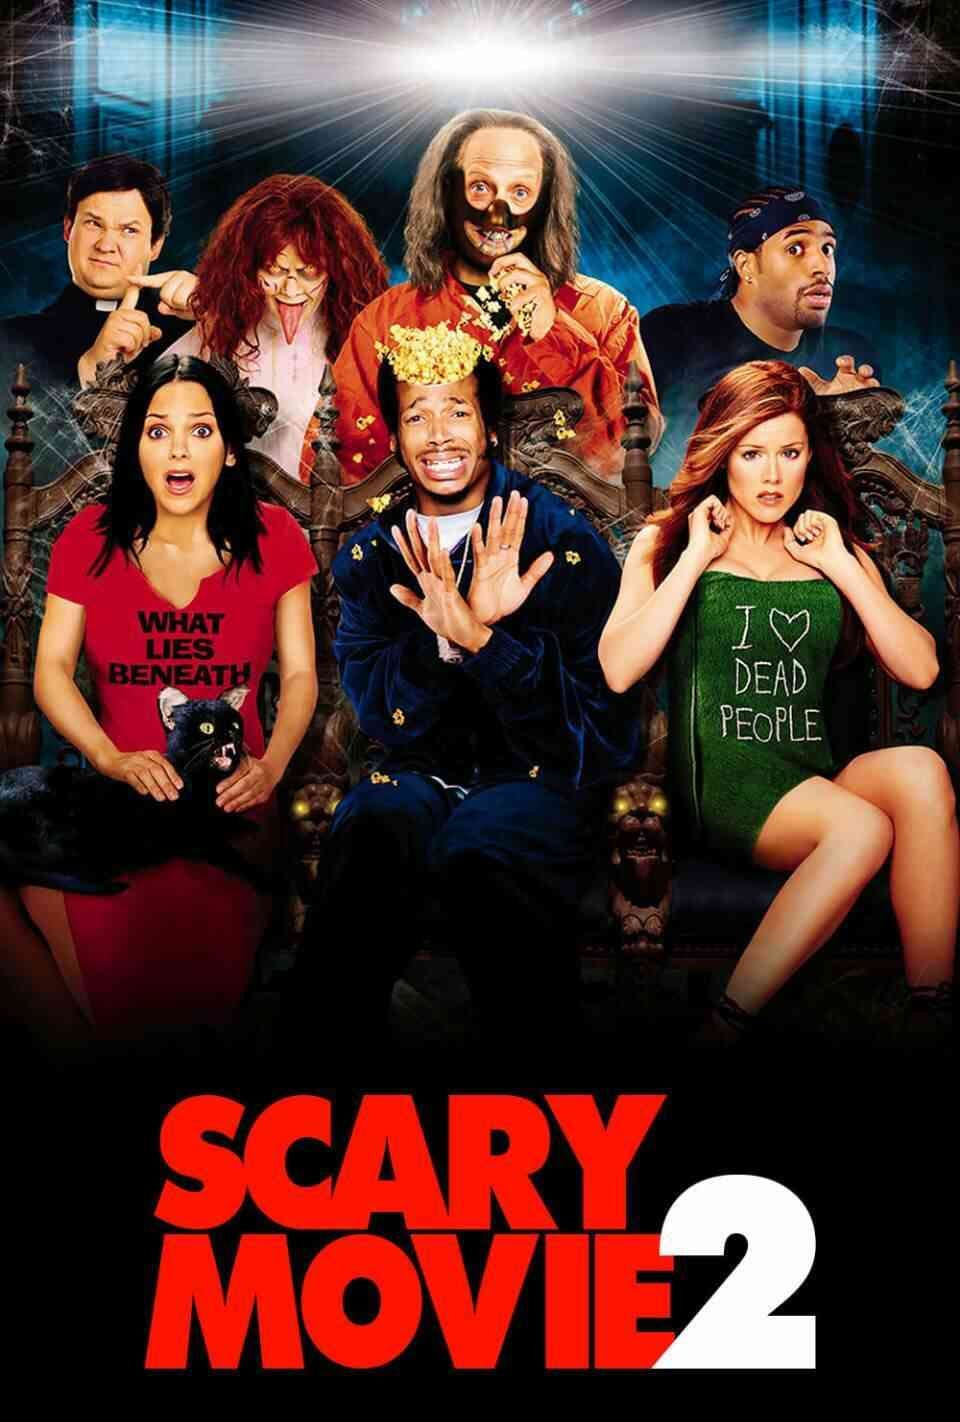 Read Scary Movie 2 screenplay (poster)